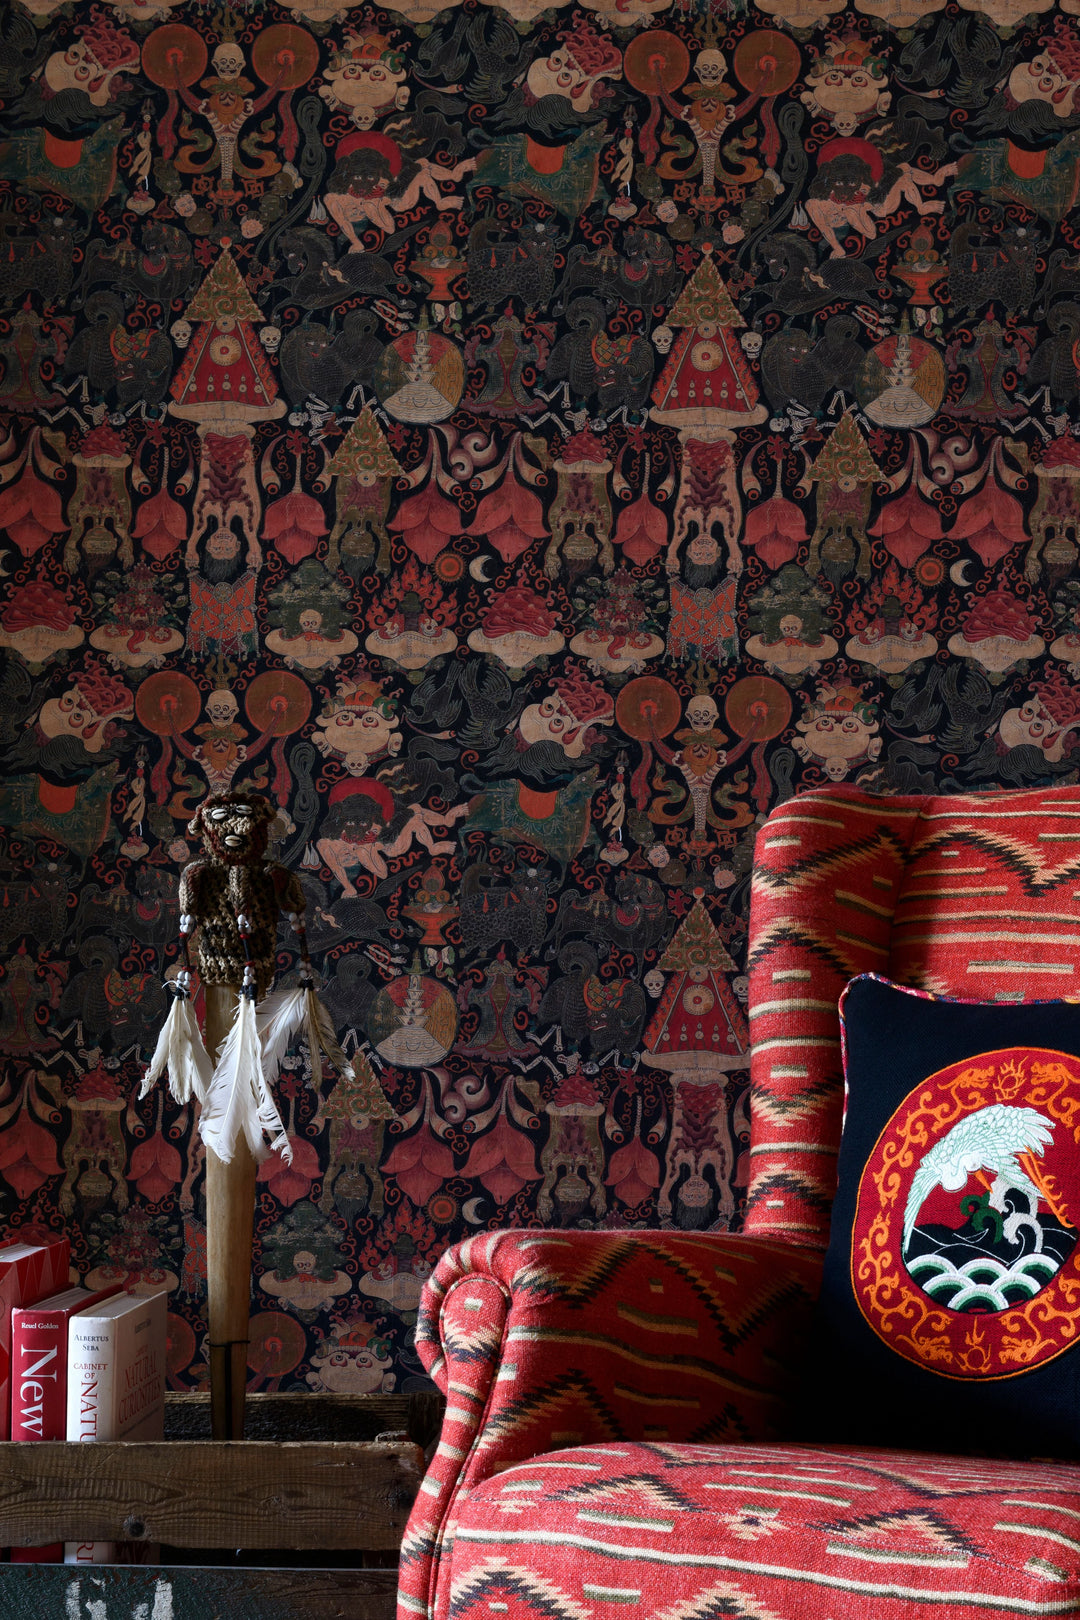 mind-the-gap-yama-dharmaraja-wallpaper-home-of-an-eccentric-man-collection-red-green-brown-room-lounge